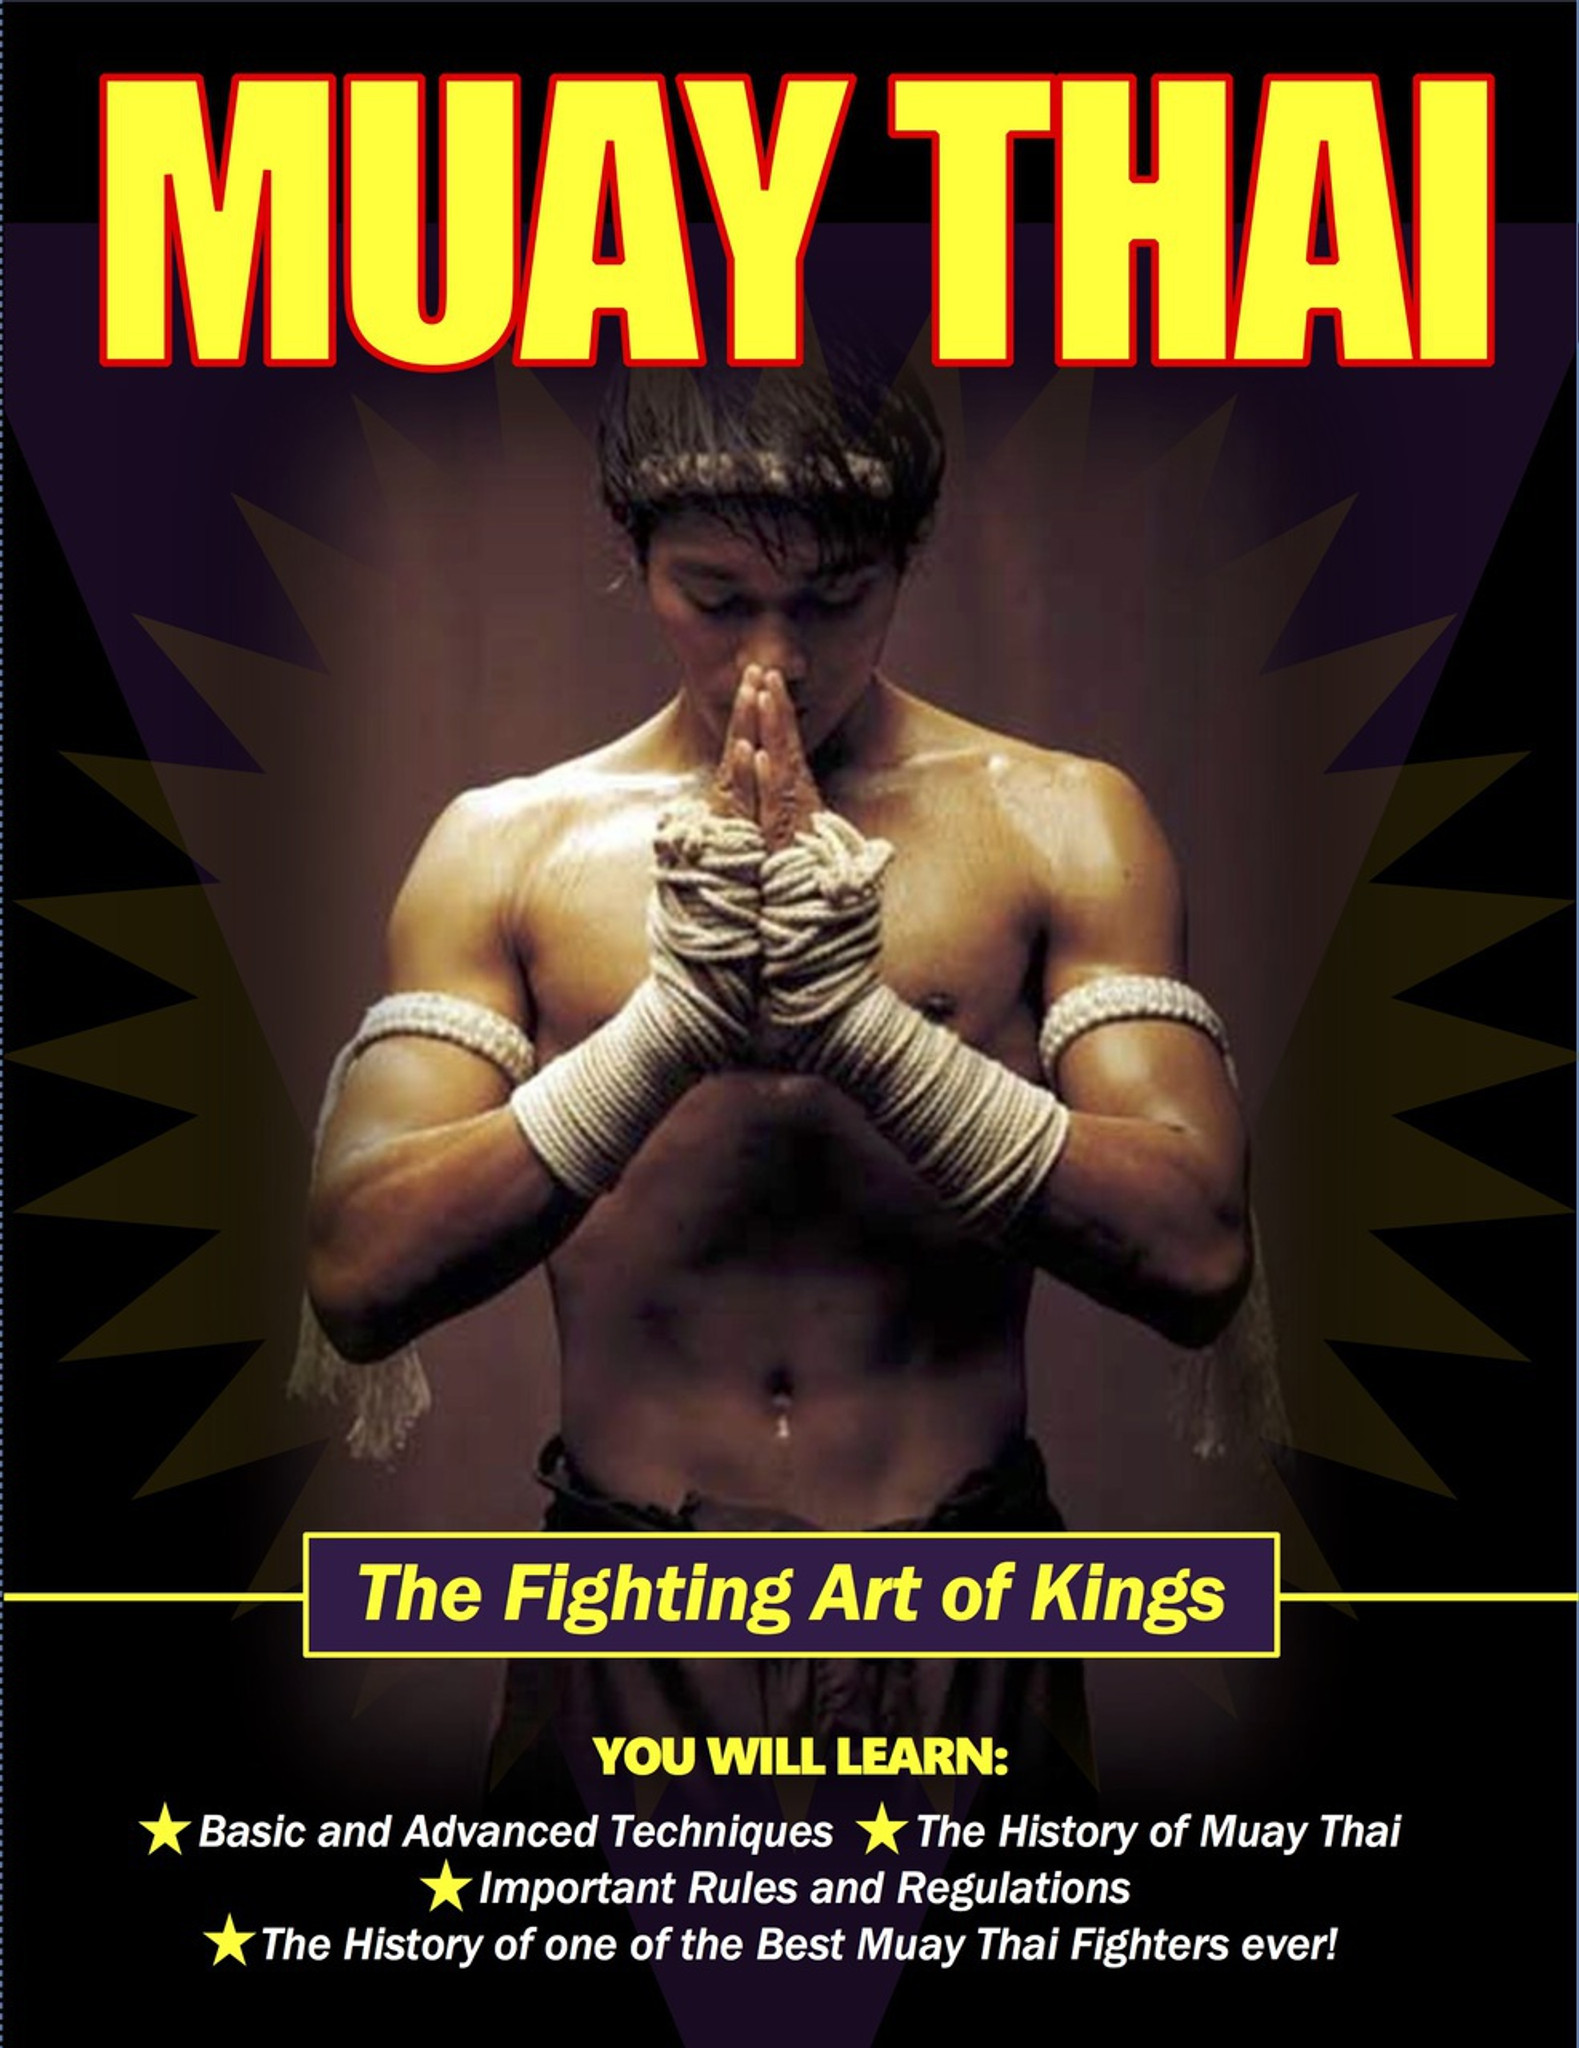 IV. Key Rules and Regulations in Modern Muay Thai